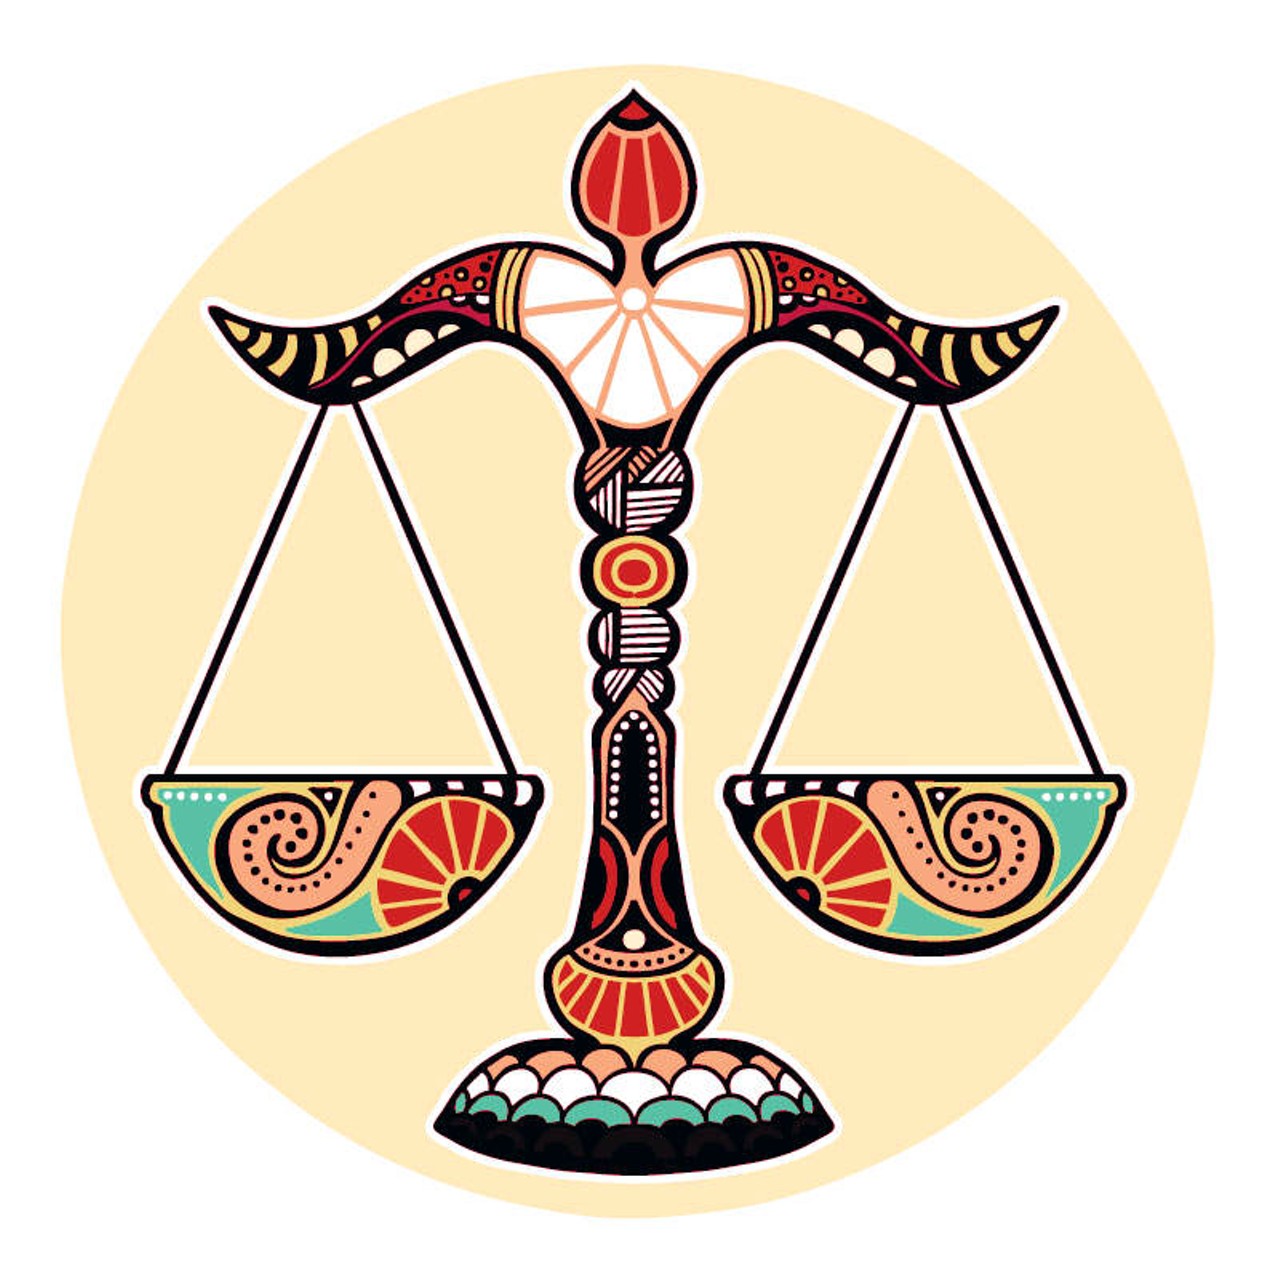 LIBRA (Sept. 21-Oct. 20): 
You have just made it through a test that was meant to strengthen your commitment to either yourself, or to a cause that is meant to bring you closer to your purpose. Moving onward and upward is bound to expose you to more than your share of idiots. With lots of support surrounding you, this lesson is about remaining in a state of integrity, physically, emotionally, and mentally, no matter what&#146;s going on. There is nothing to fear. You have a cache of good credit with whoever&#146;s upstairs. Knowing what matters and staying true to yourself is the key.